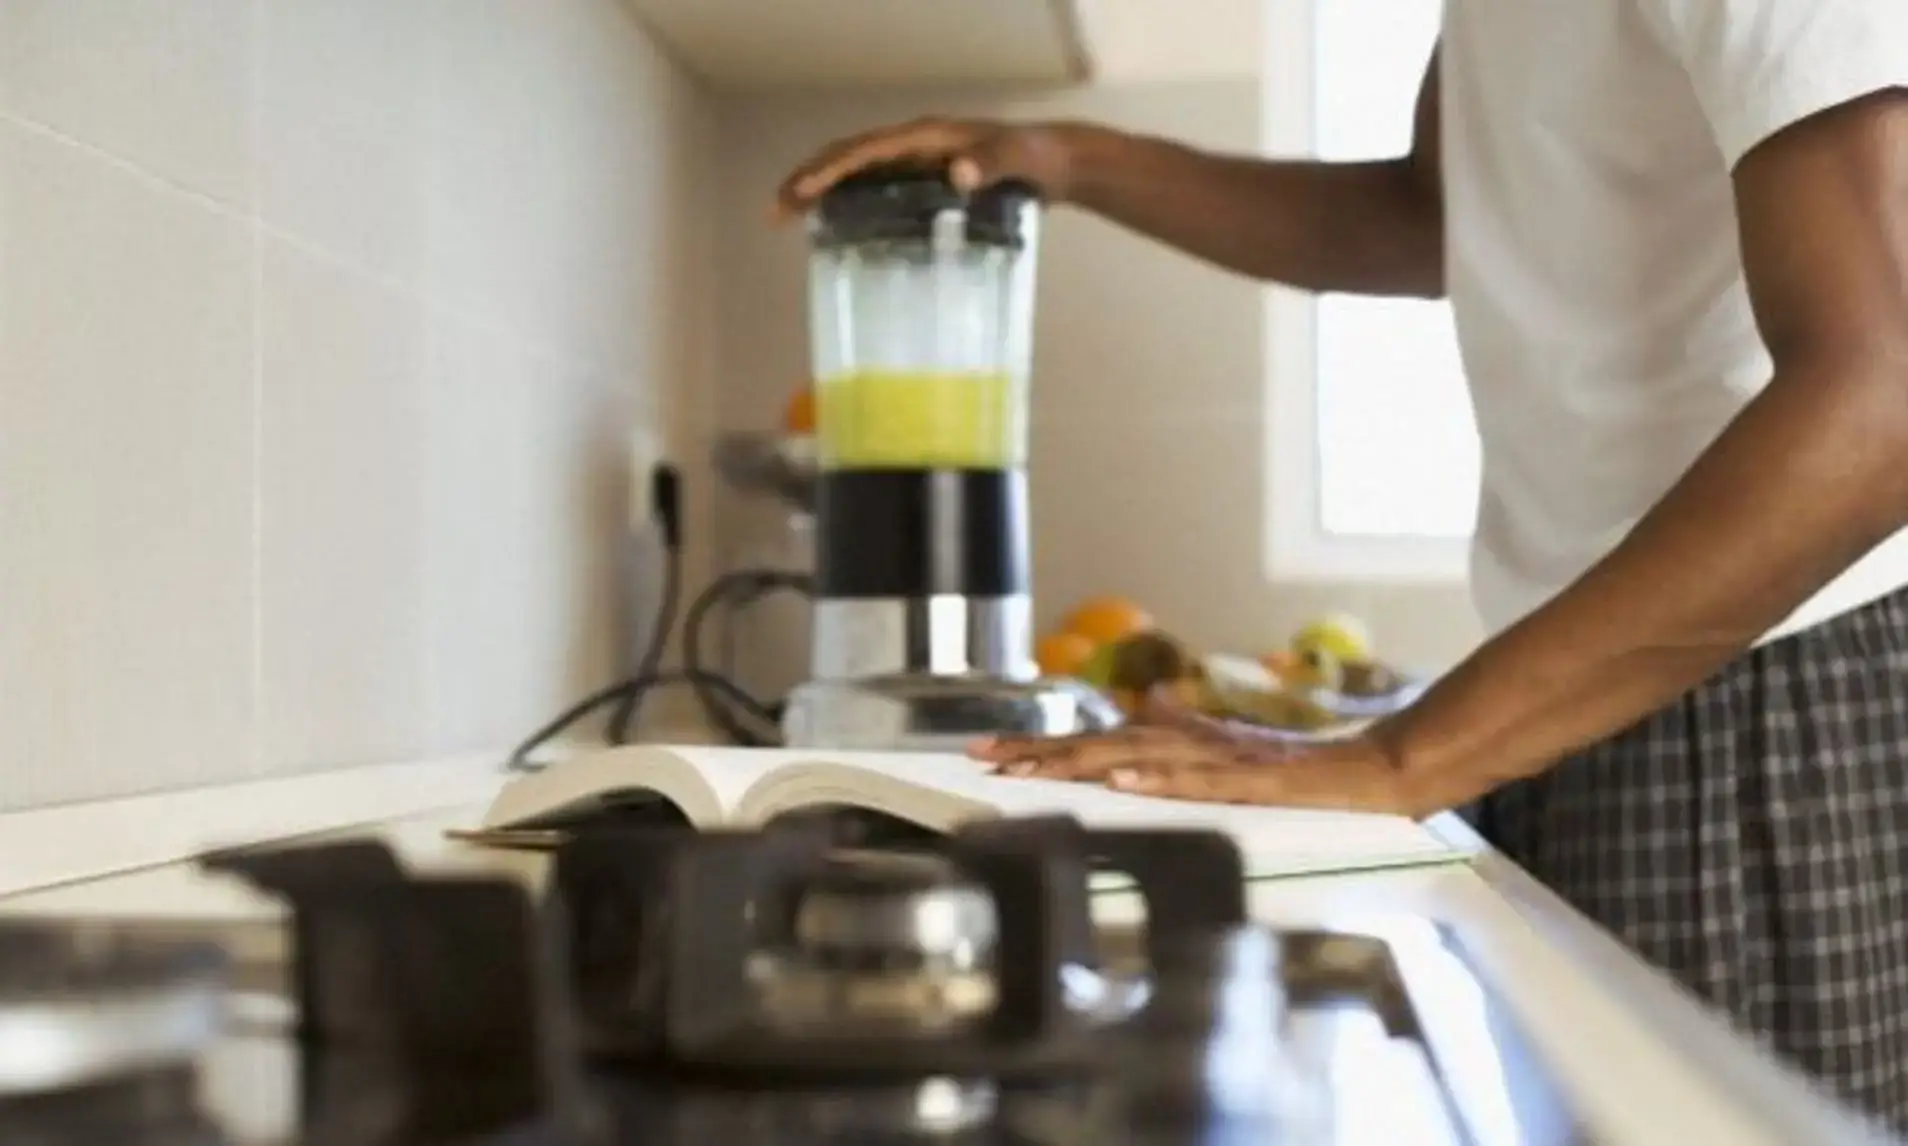 Person using a blender in a kitchen.